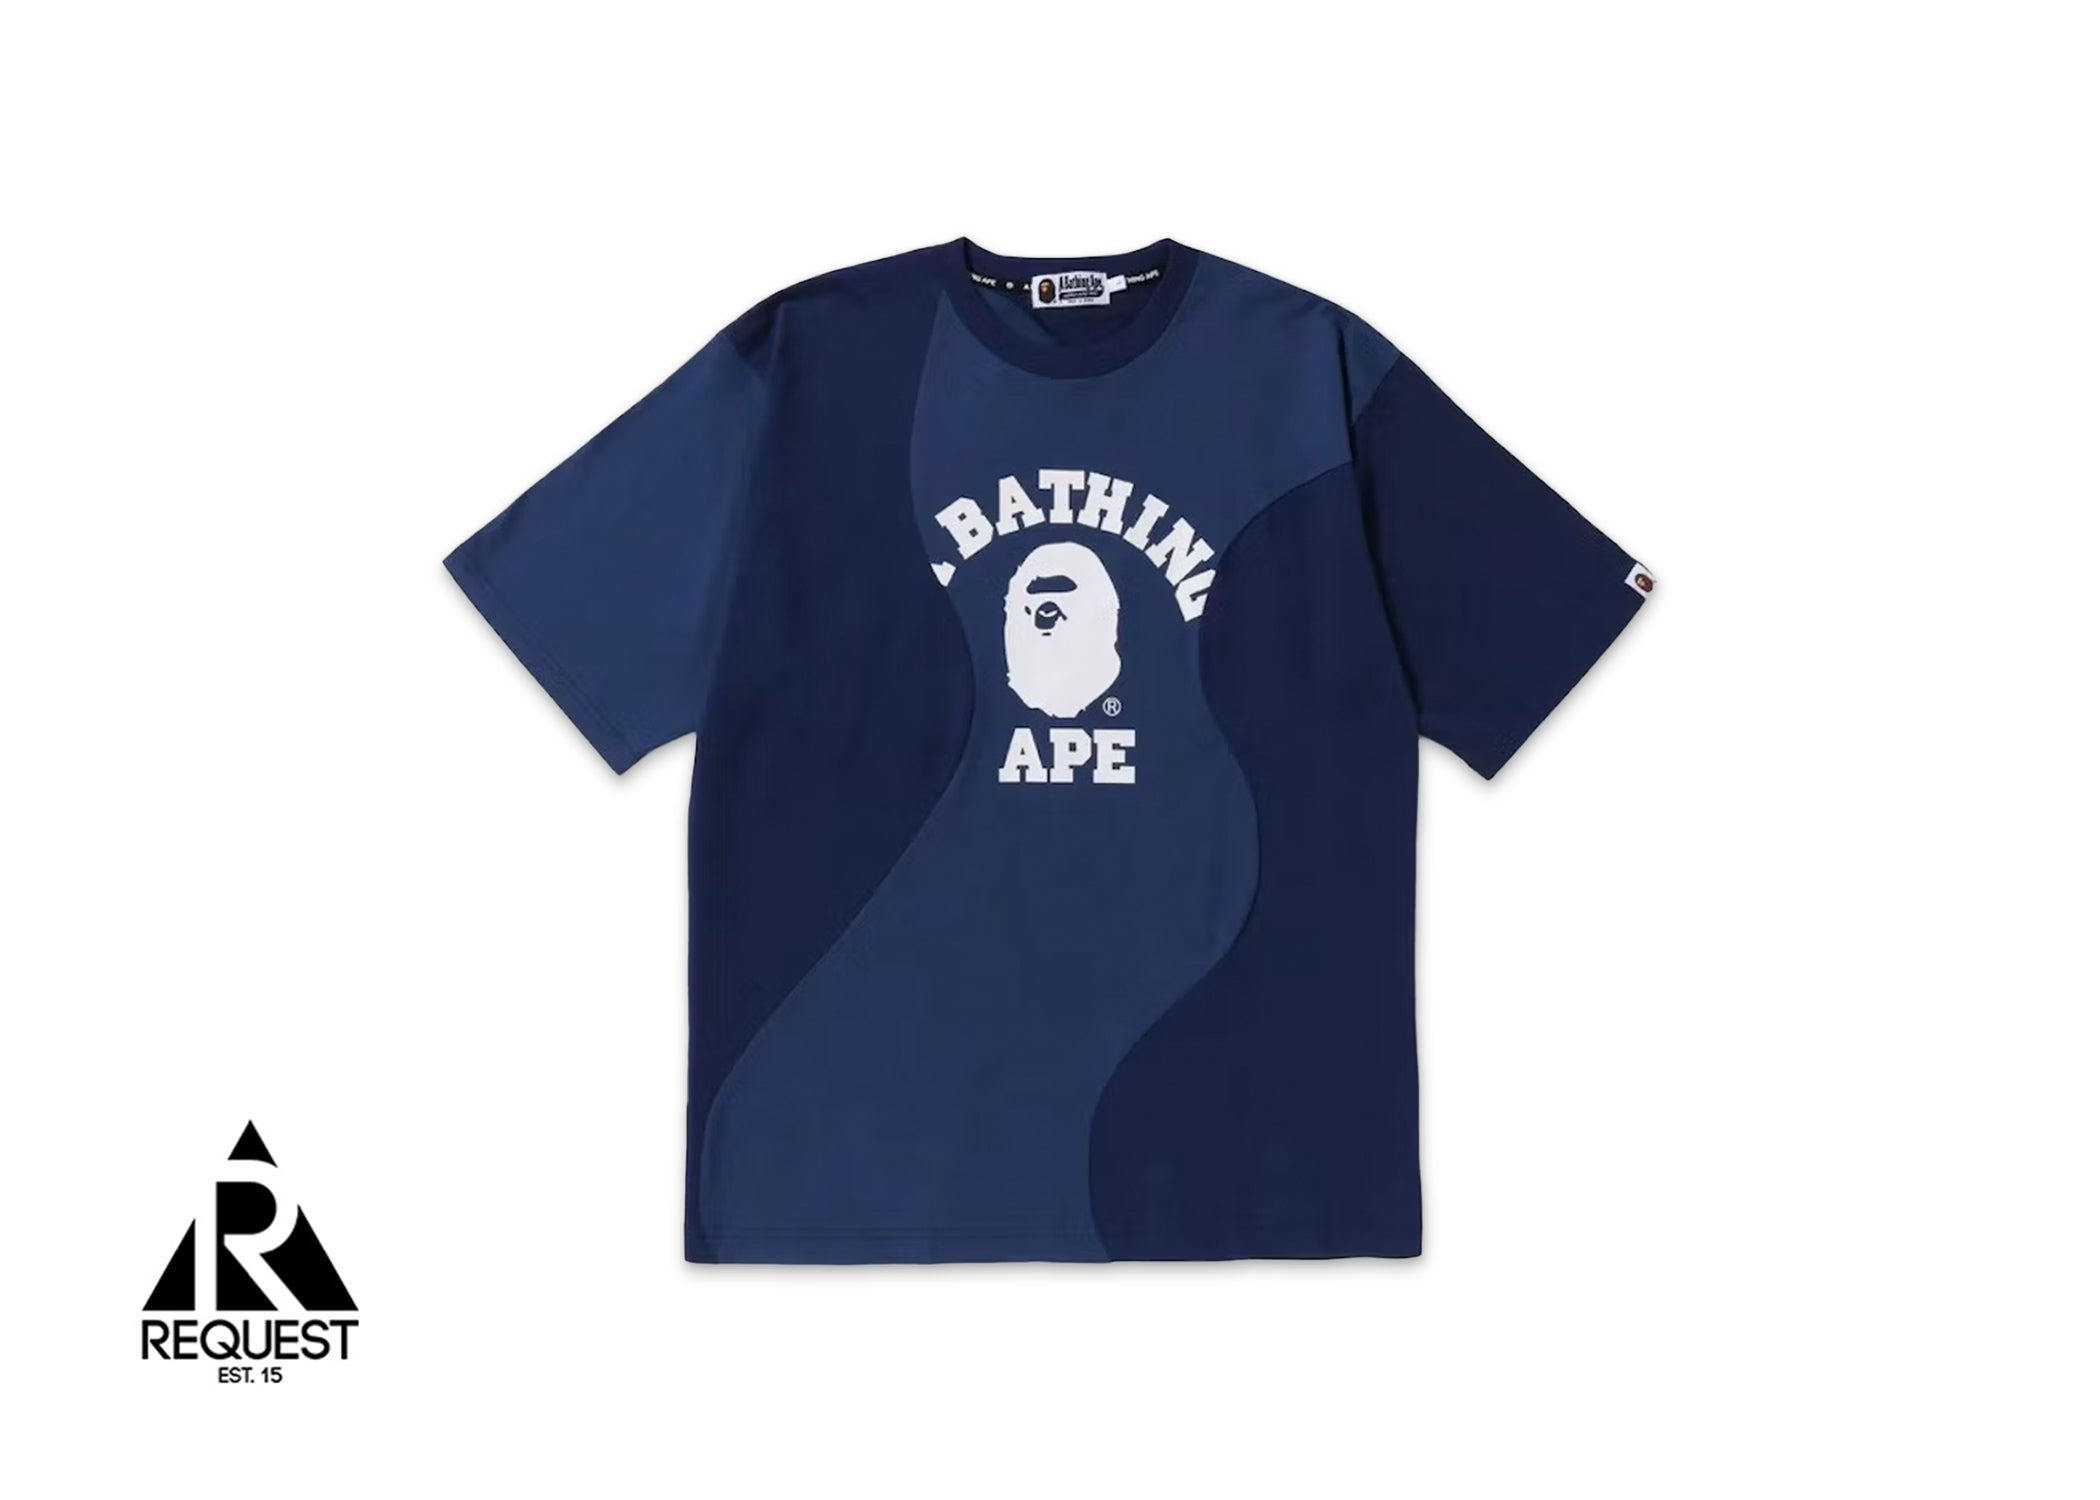 A Bathing Ape BAPE Cutting College Relaxed Fit Tee "Navy"